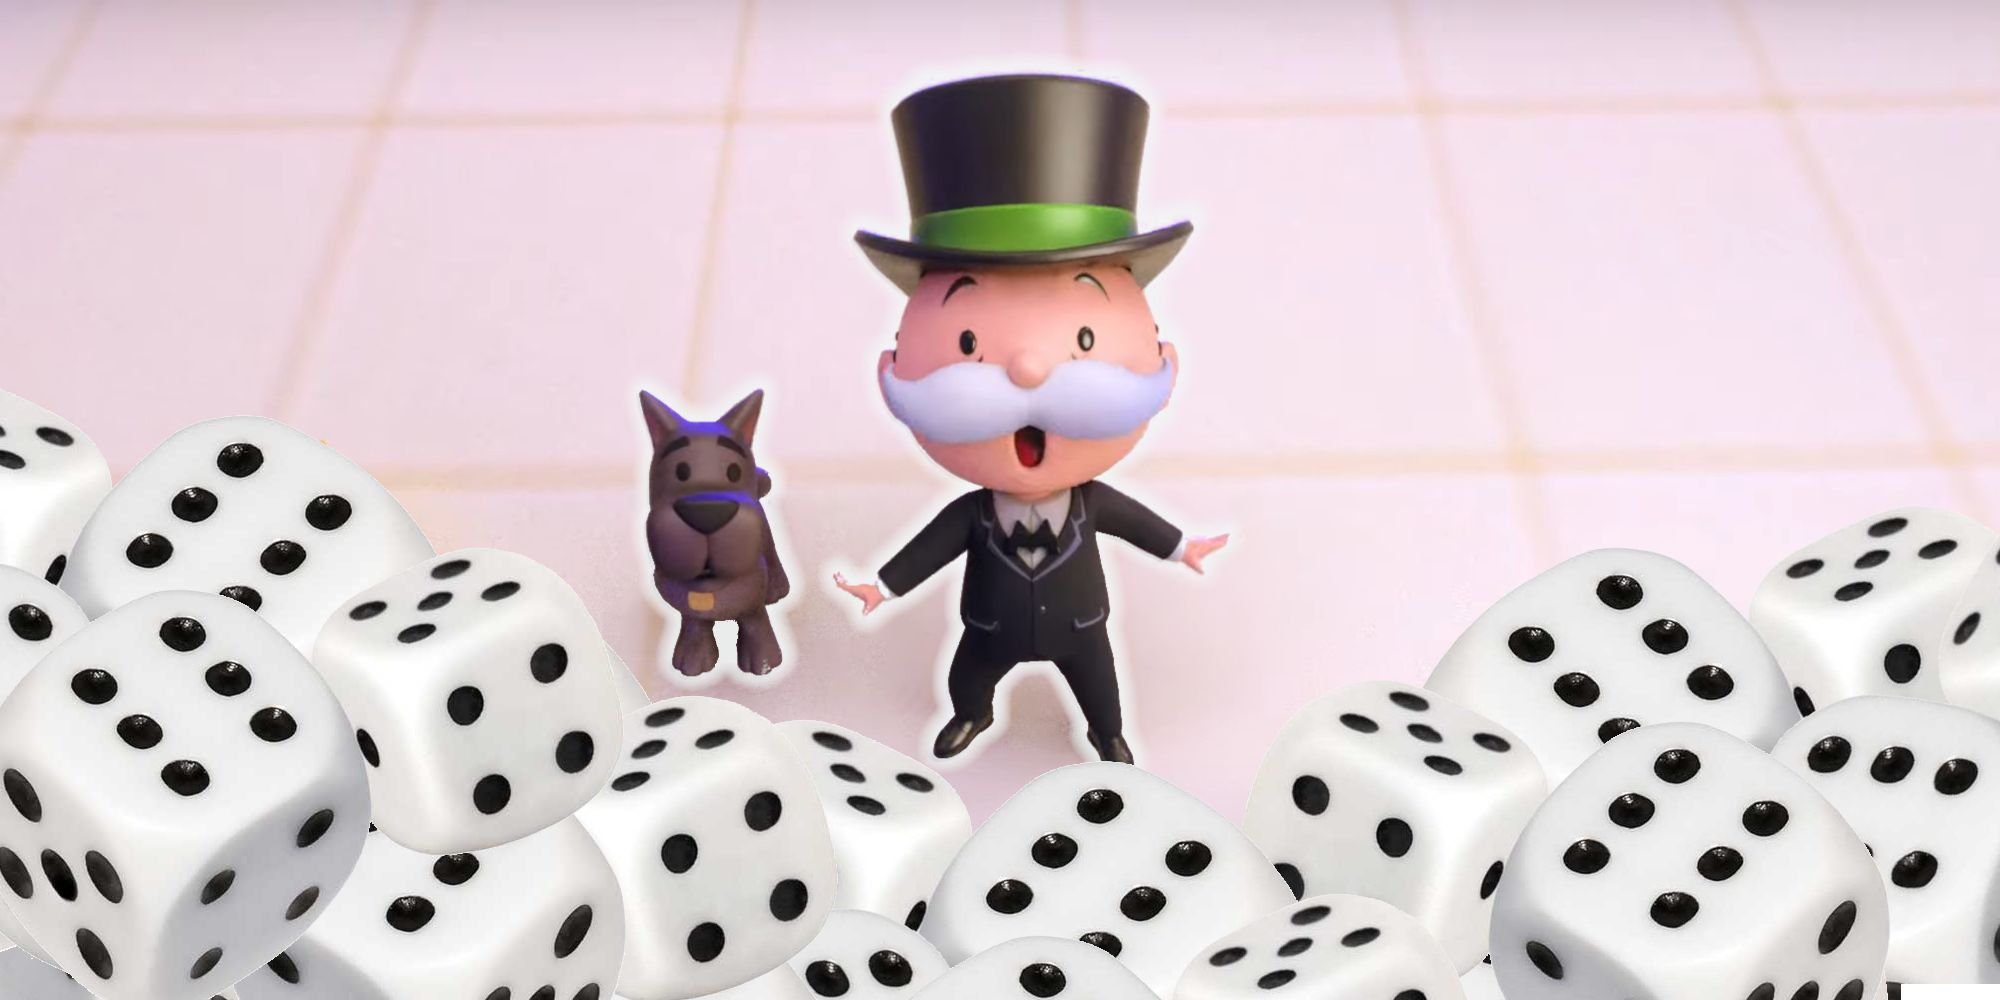 Every Reward In The President's Trail Event Monopoly GO